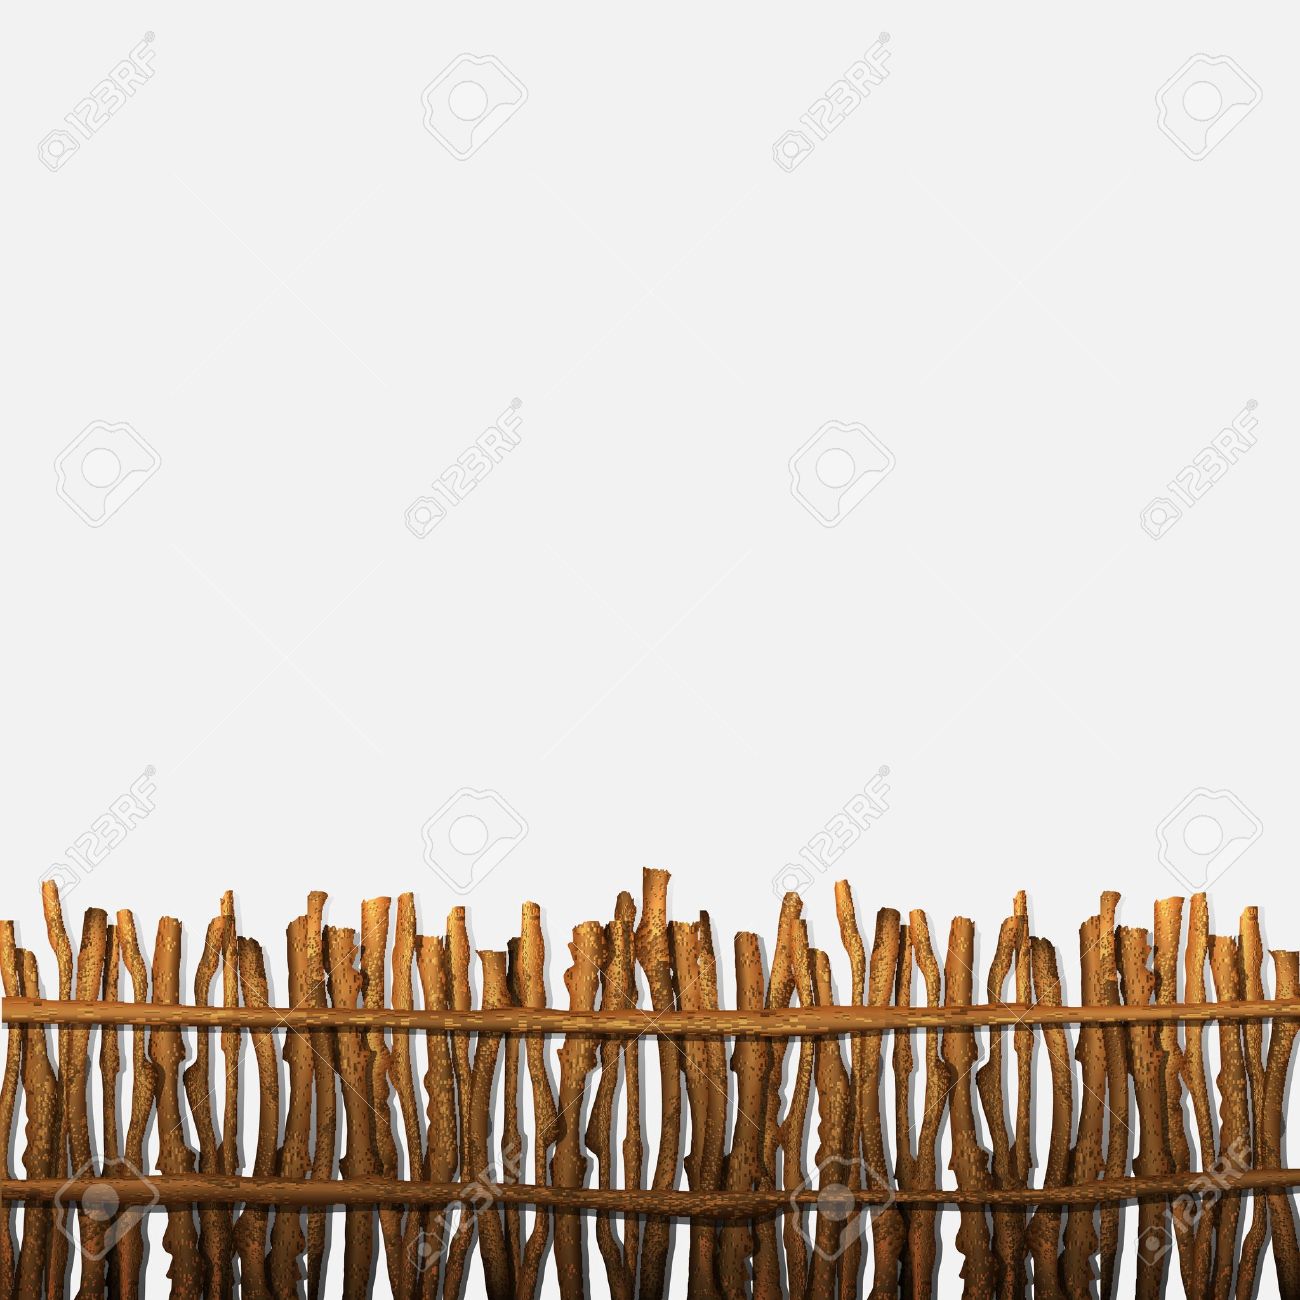 Rustic Fence Royalty Free Cliparts, Vectors, And Stock.